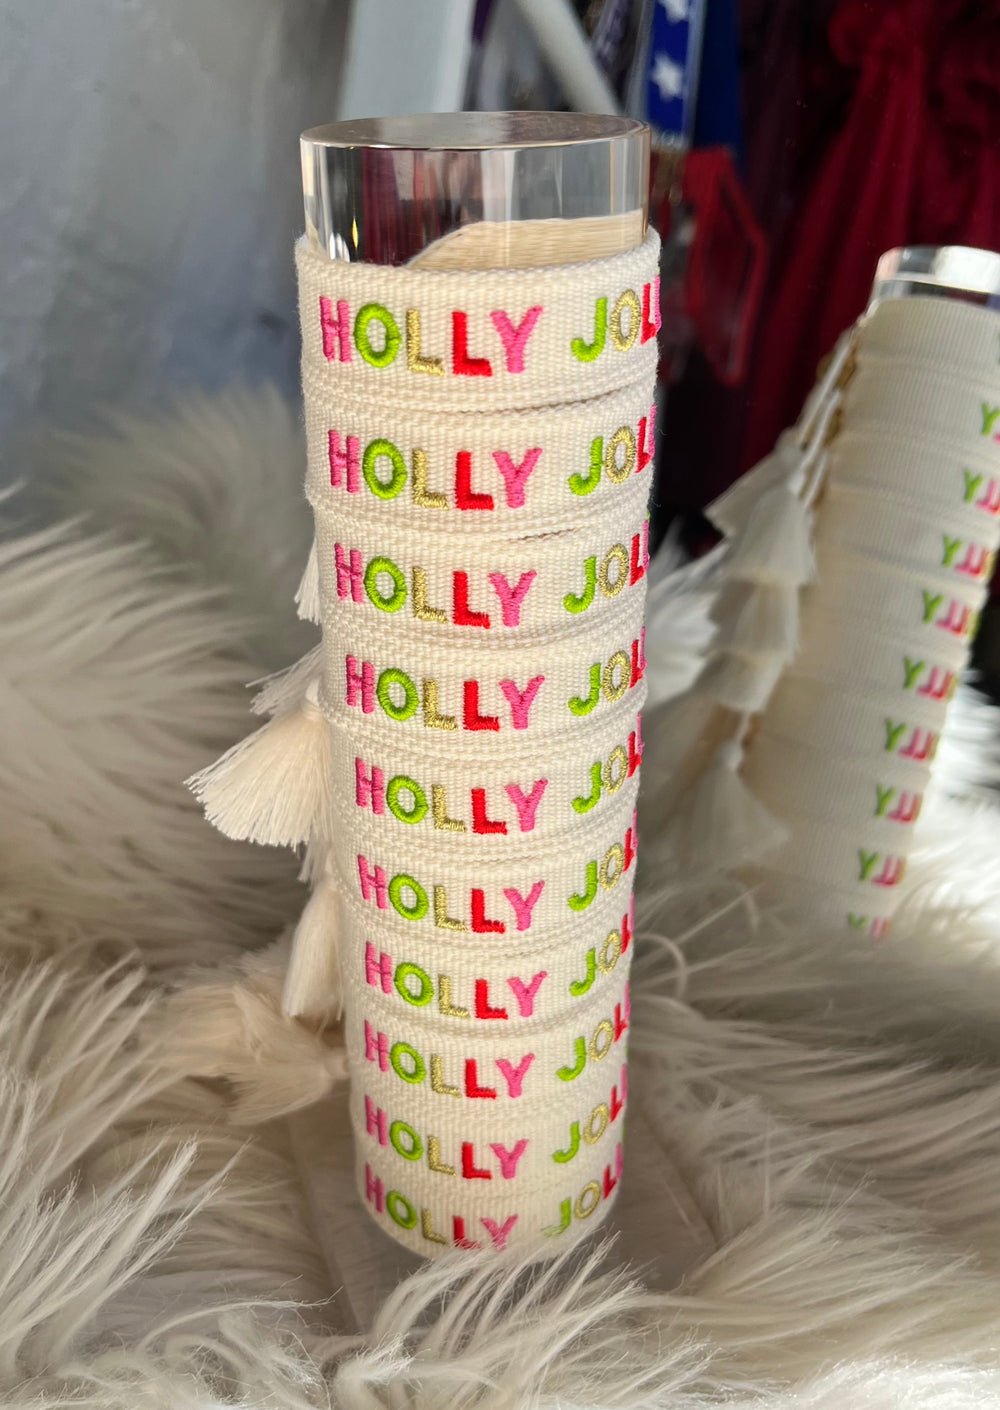 Holly Jolly Bracelet, Jewelry, Kenzie Collective, Adeline, dallas boutique, dallas texas, texas boutique, women's boutique dallas, adeline boutique, dallas boutique, trendy boutique, affordable boutique